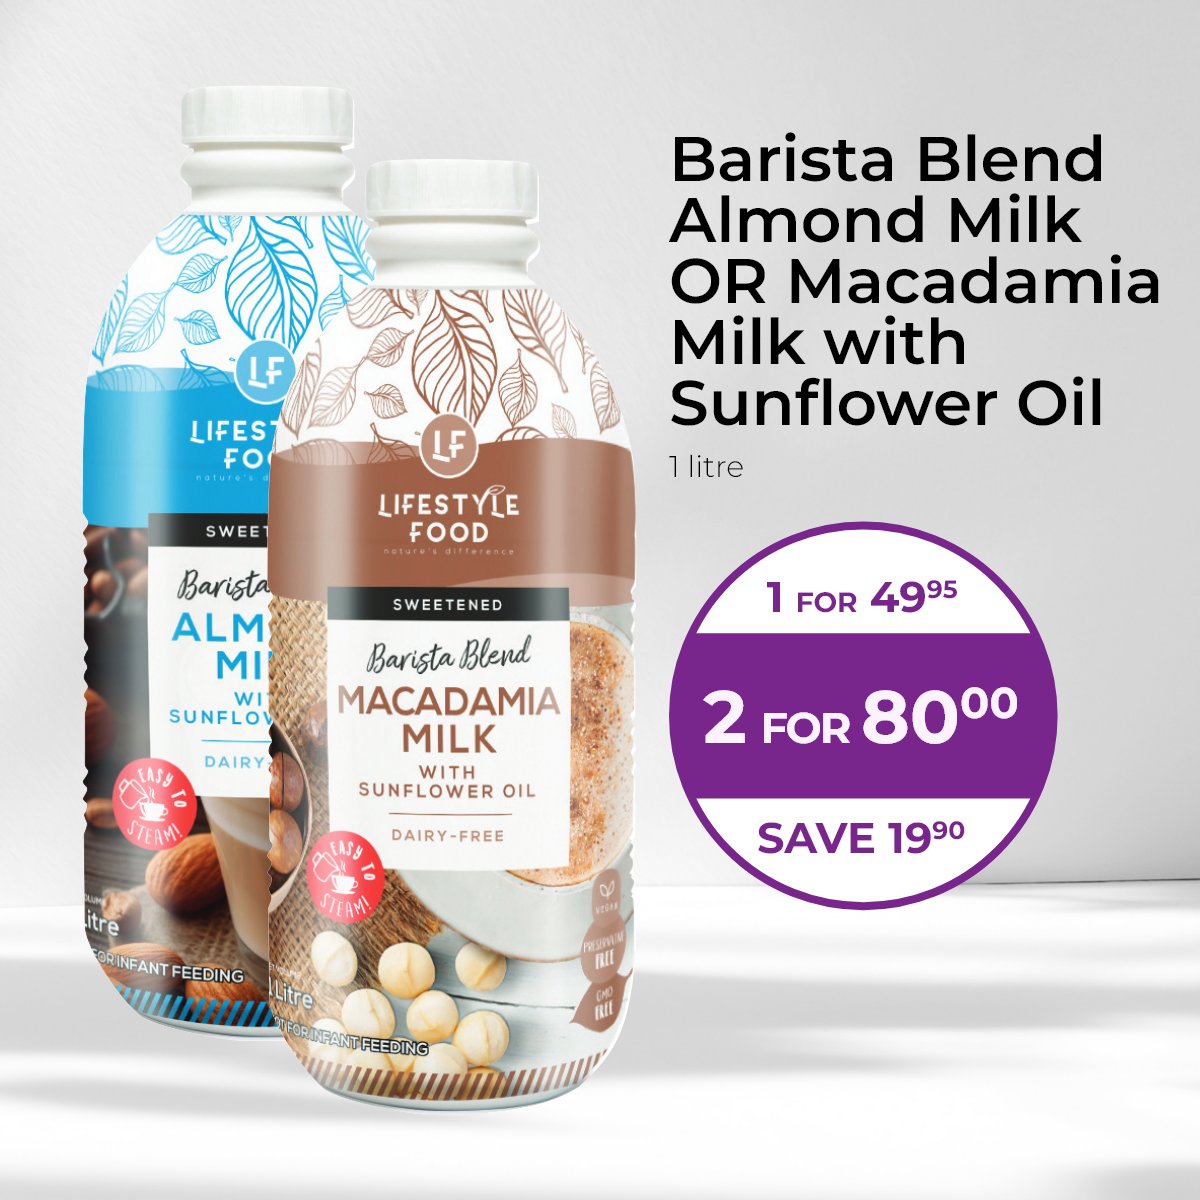 Mad about milk but don’t want dairy? Save on almond or macadamia milk now: bit.ly/4b4cxug Offer valid until 12 May 2024. #LifestyleFood #NutMilk #BestBuys #DisChem